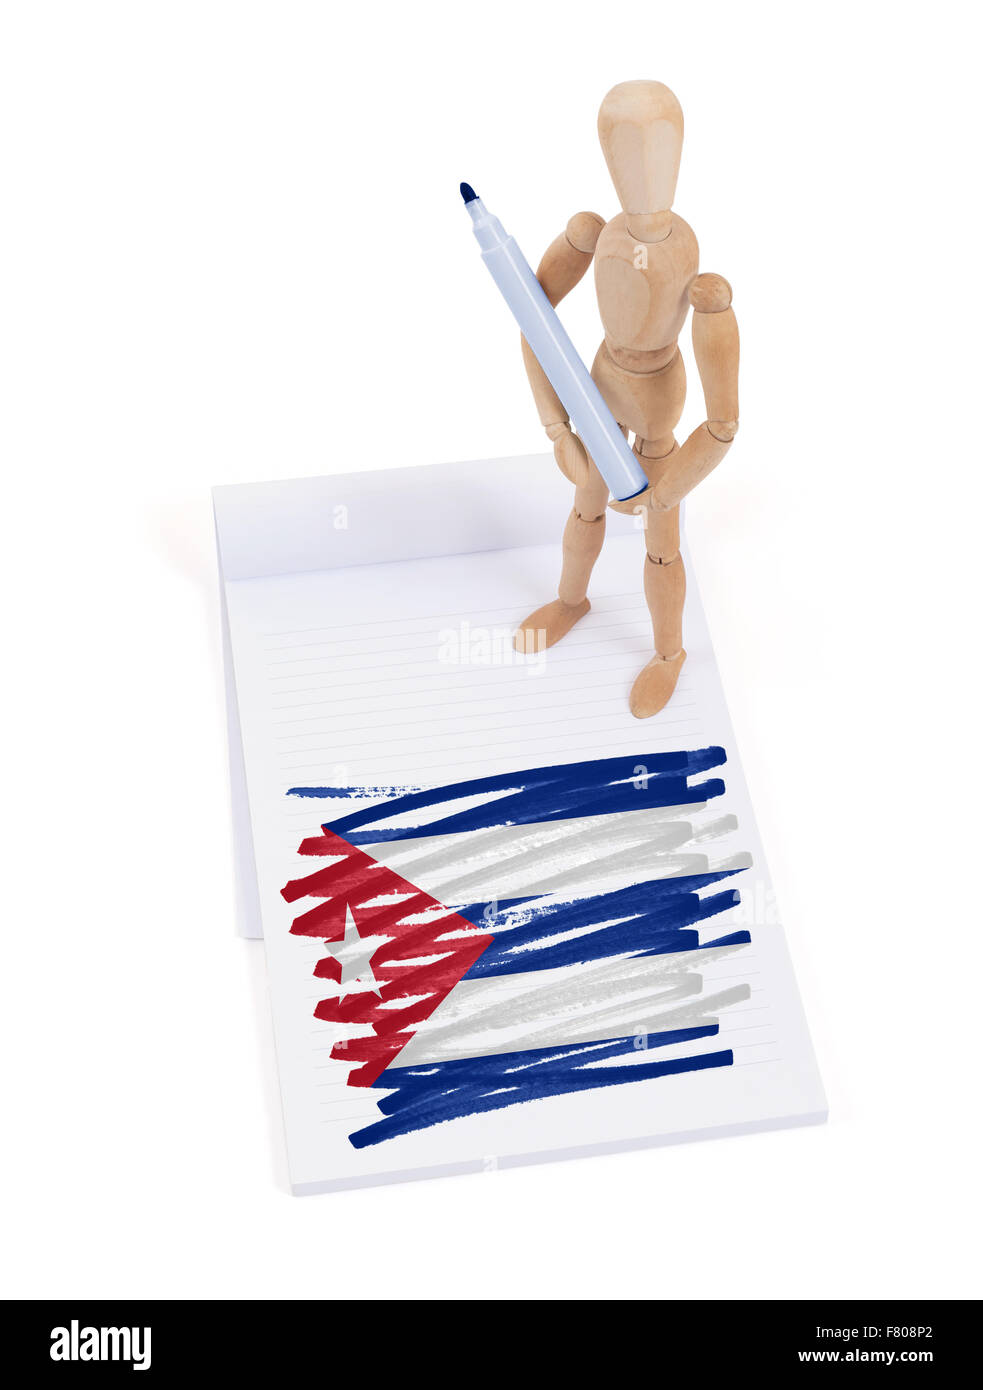 Wooden mannequin made a drawing of a flag - Cuba Stock Photo